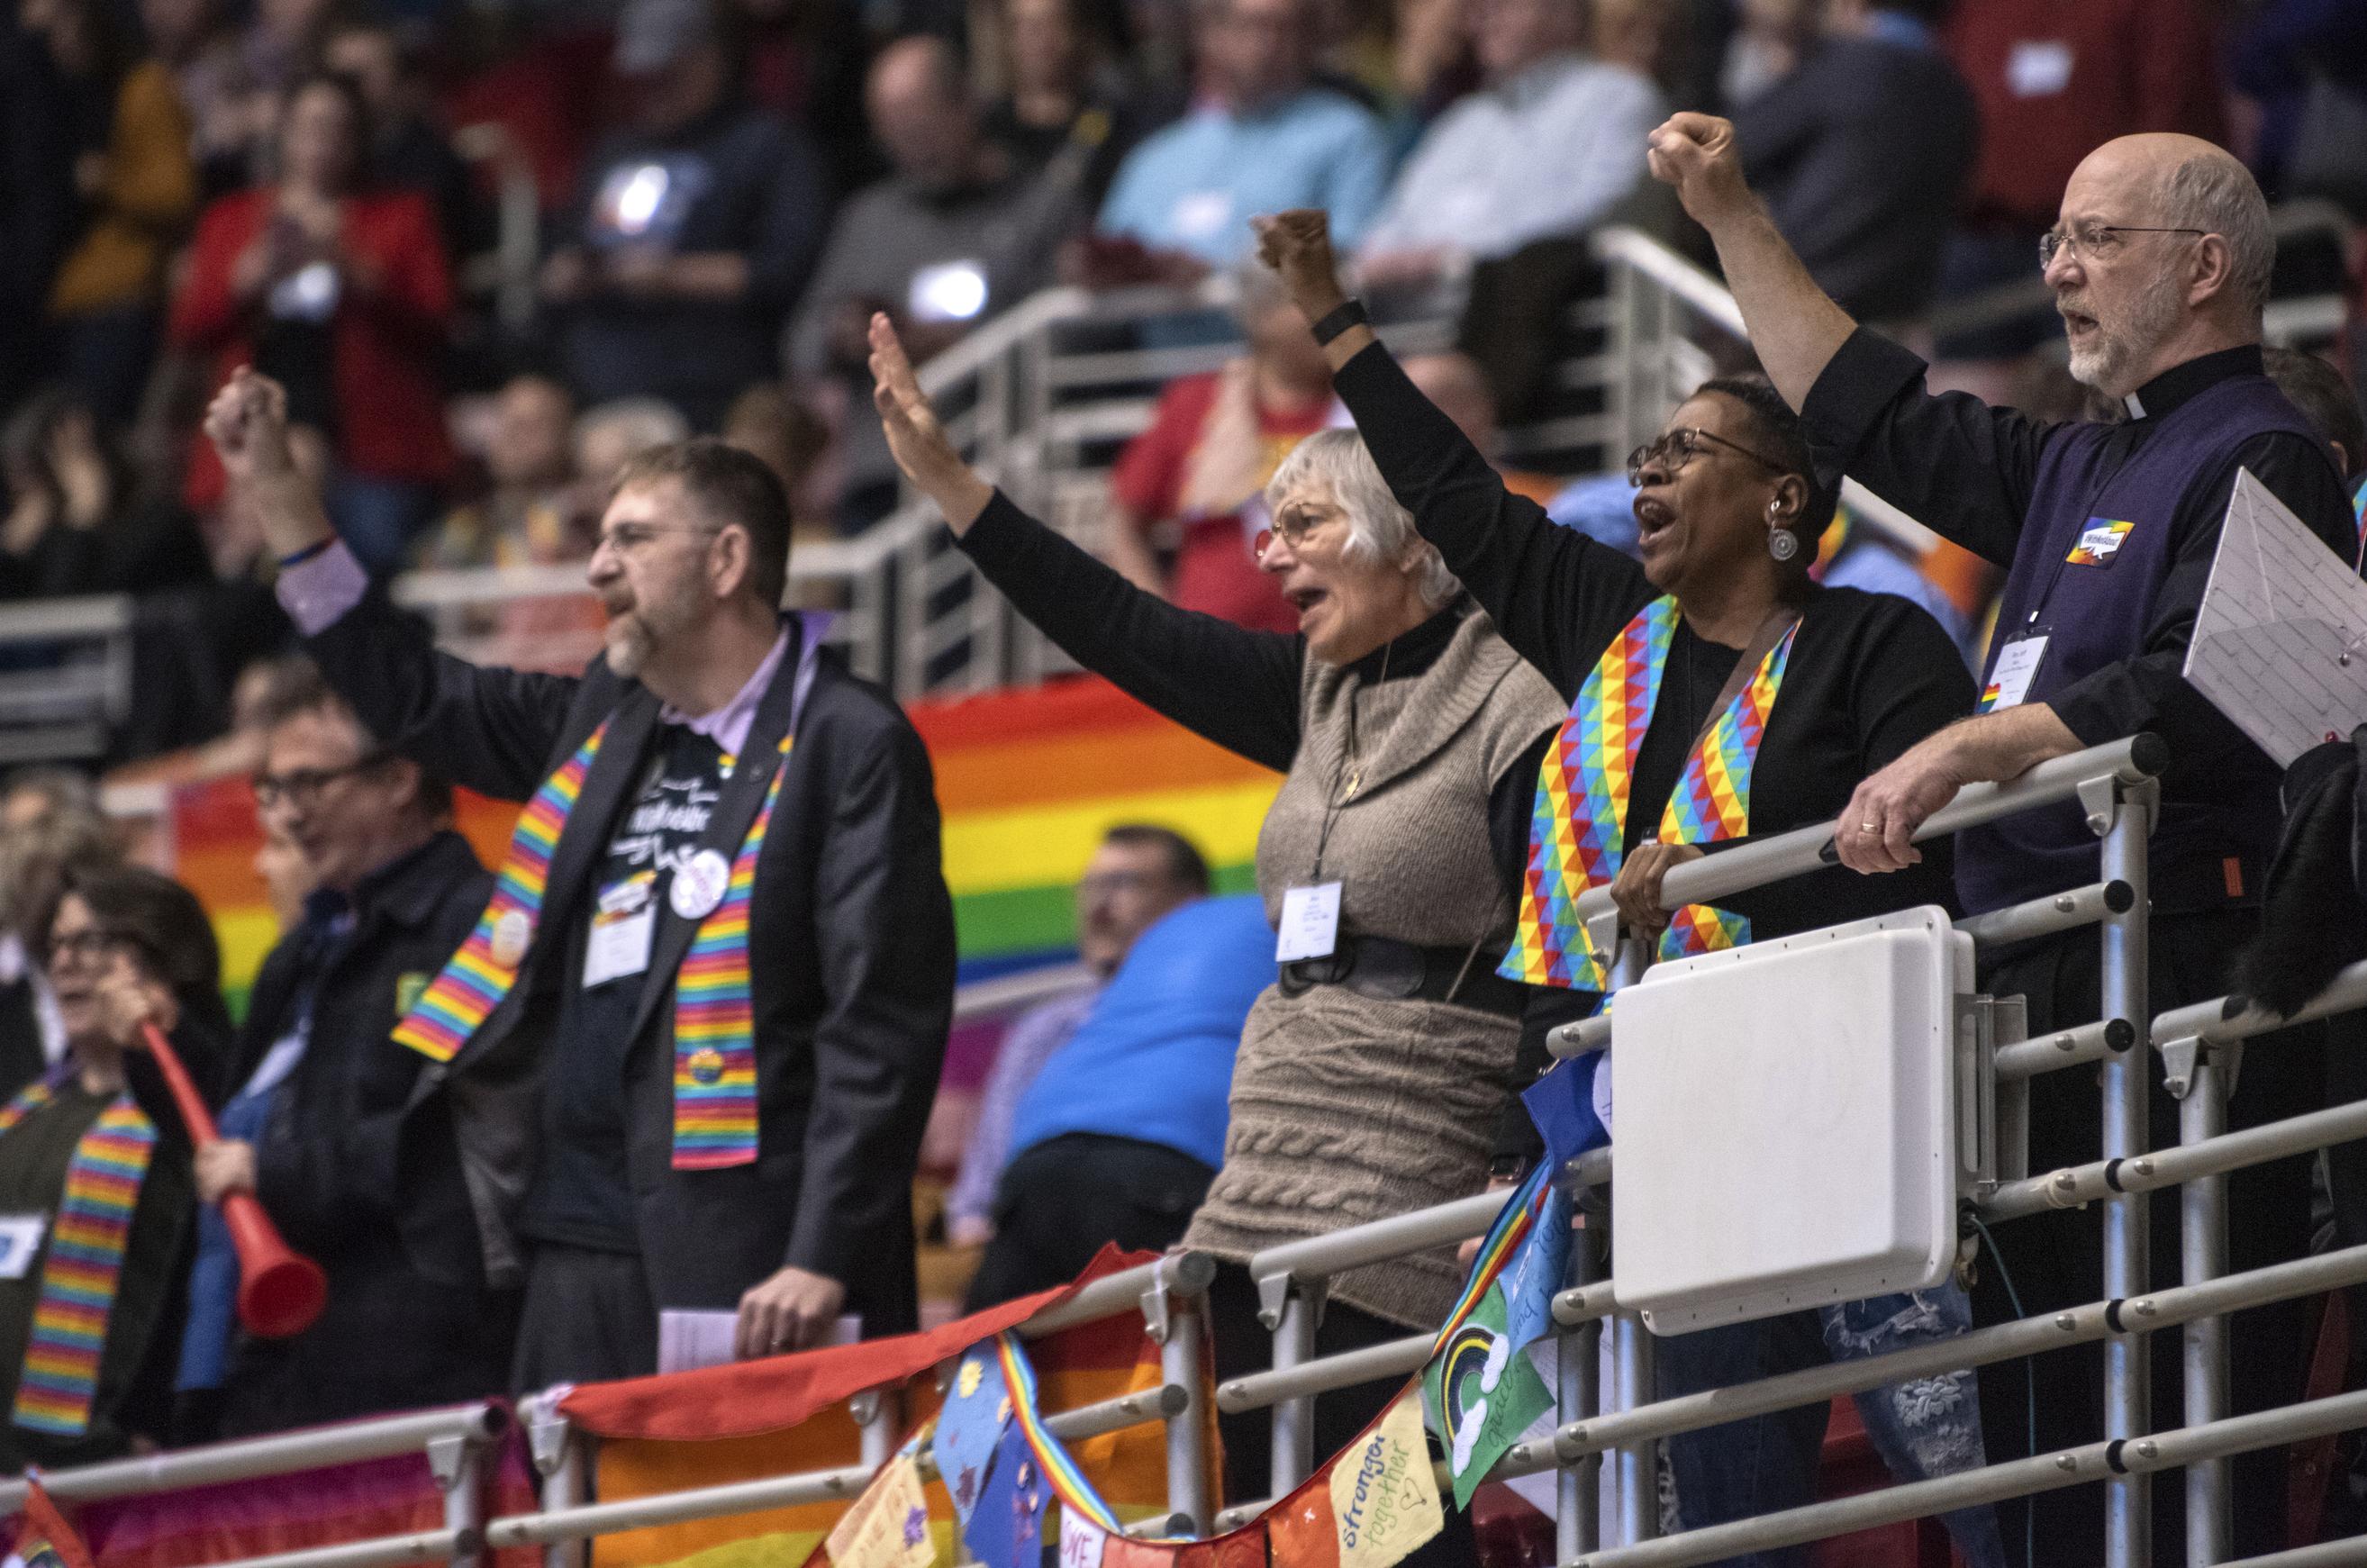 Area leaders of United Methodist church react to LGBT decisions The